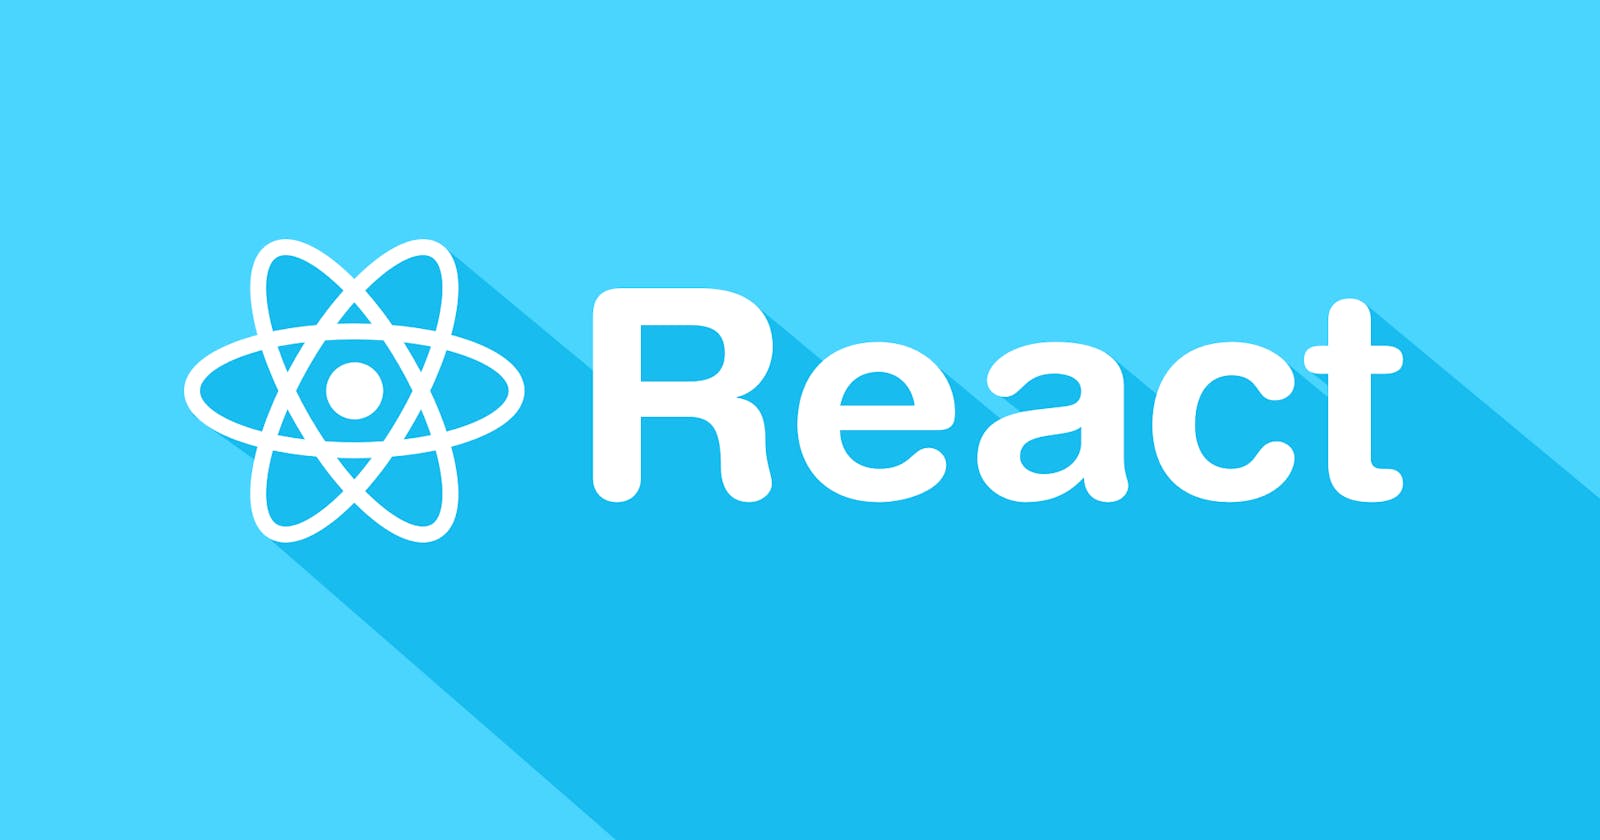 How and When to start learning Reactjs(or any Framework).